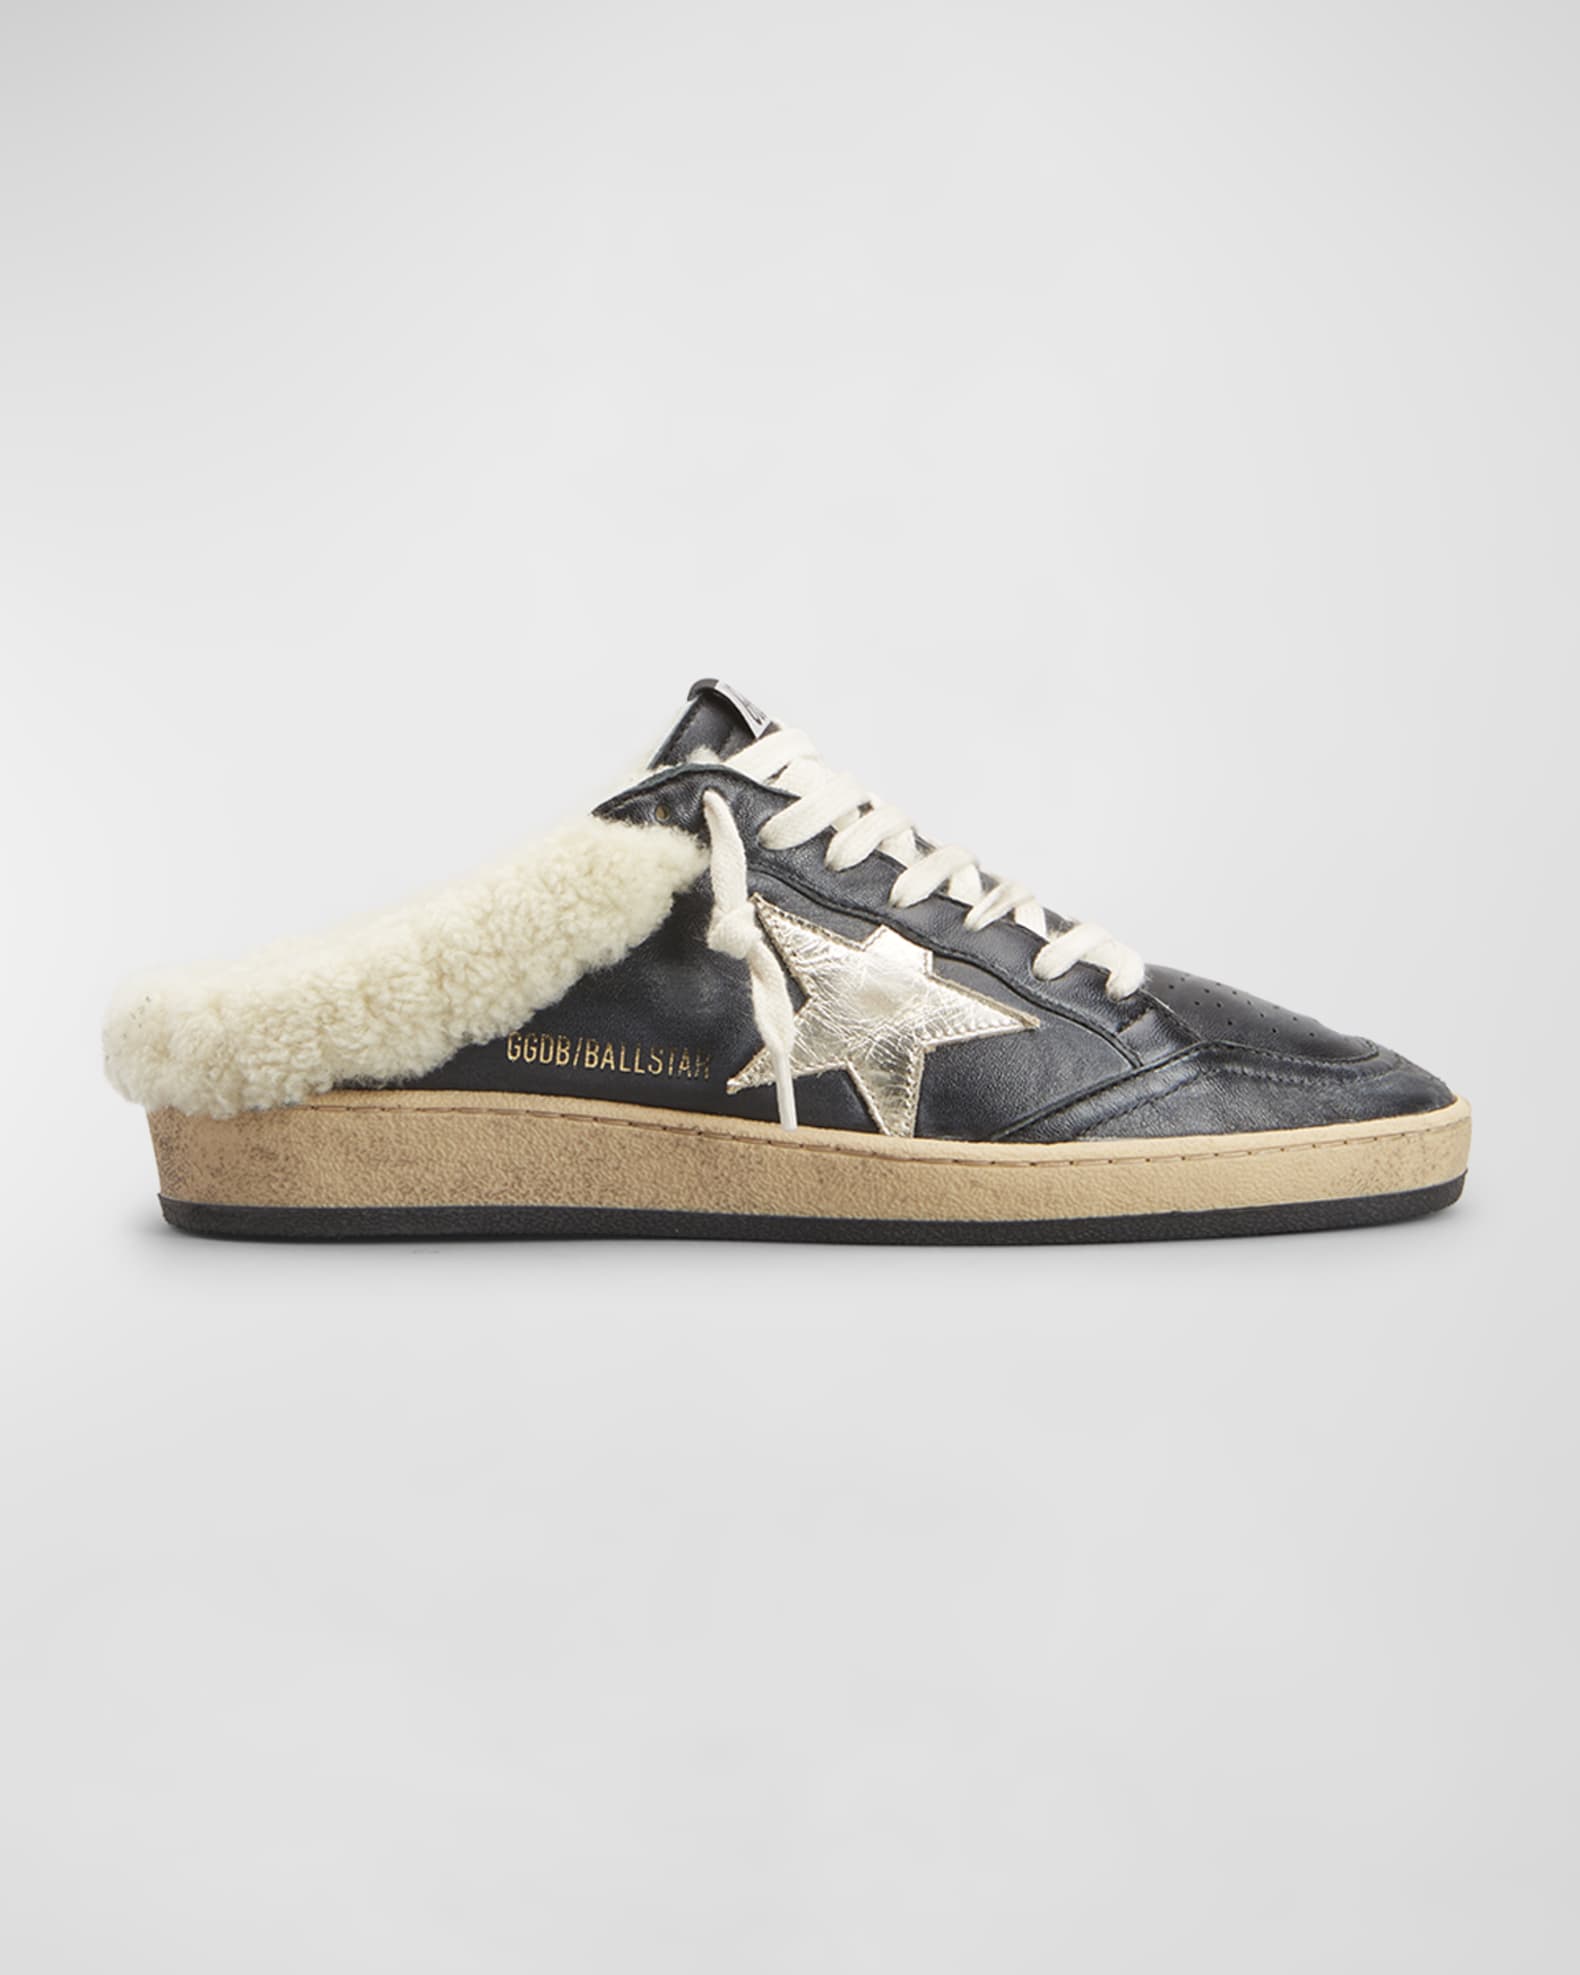 California Shearling And Suede Tote in Beige - Golden Goose